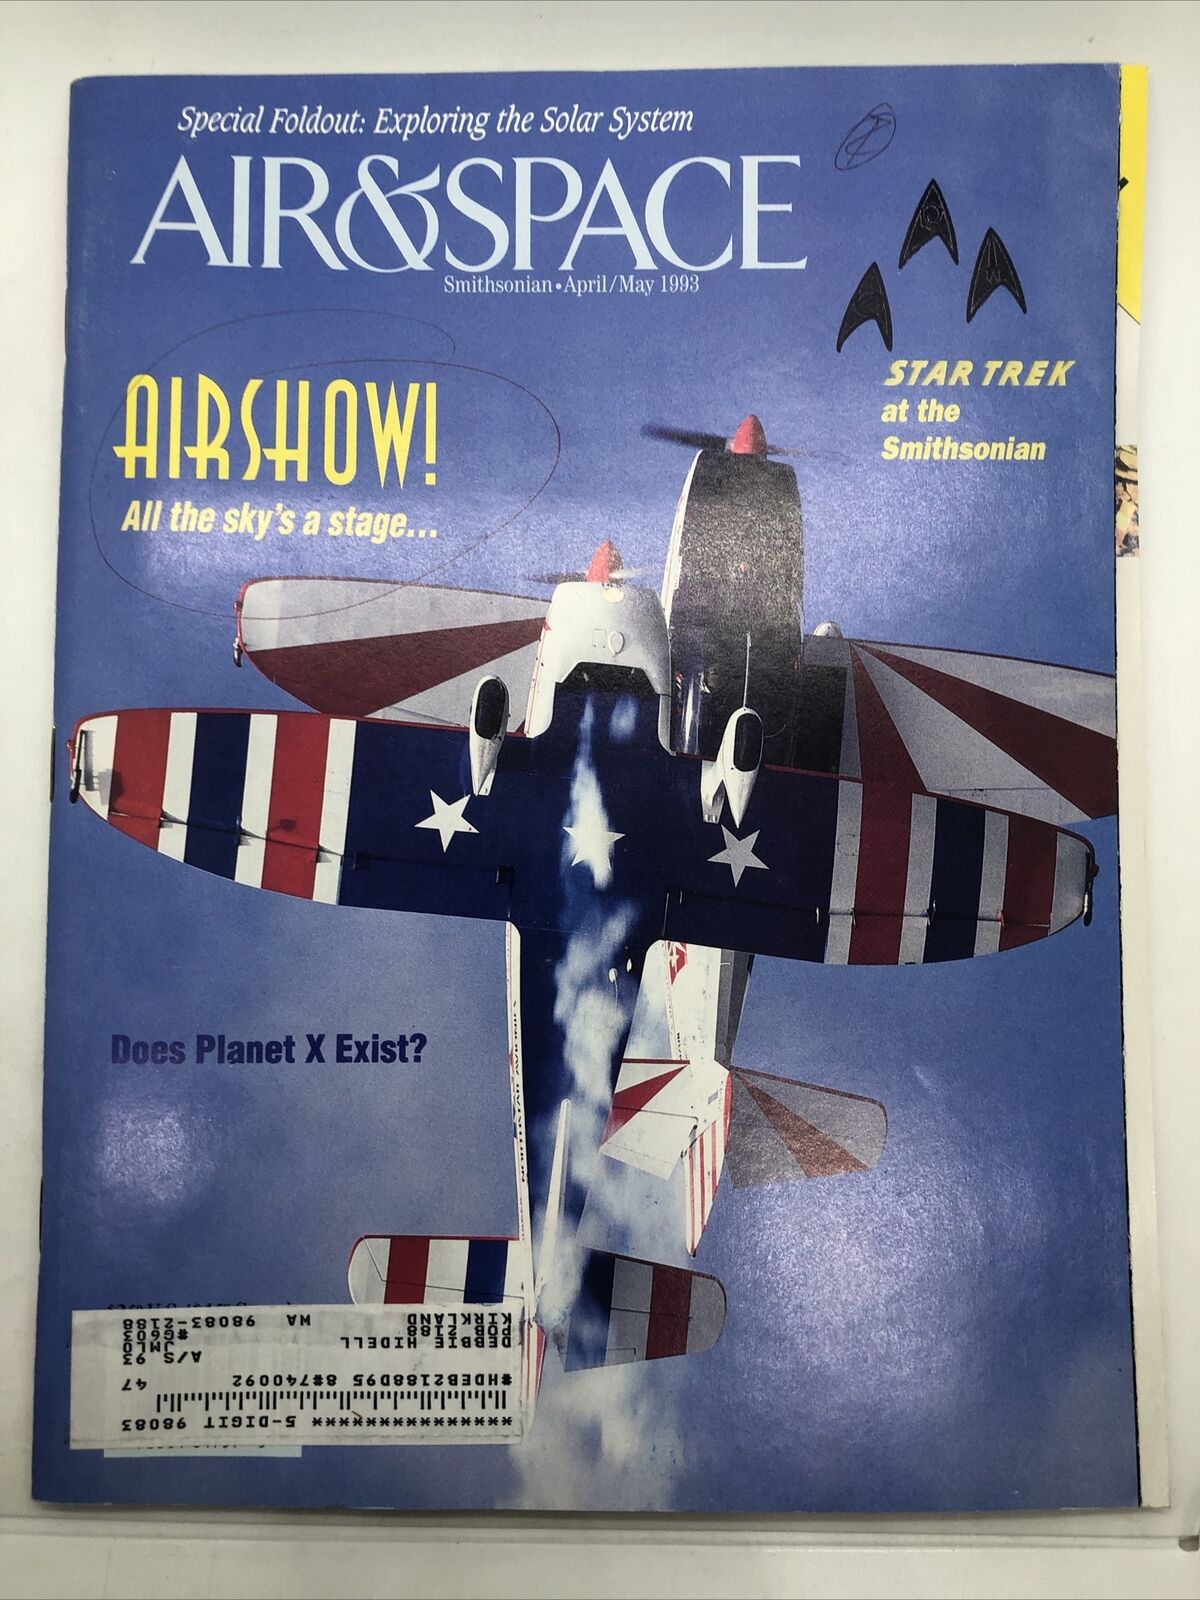 Air & Space Magazine (April/May 1993) Star Trek At The Smithsonian